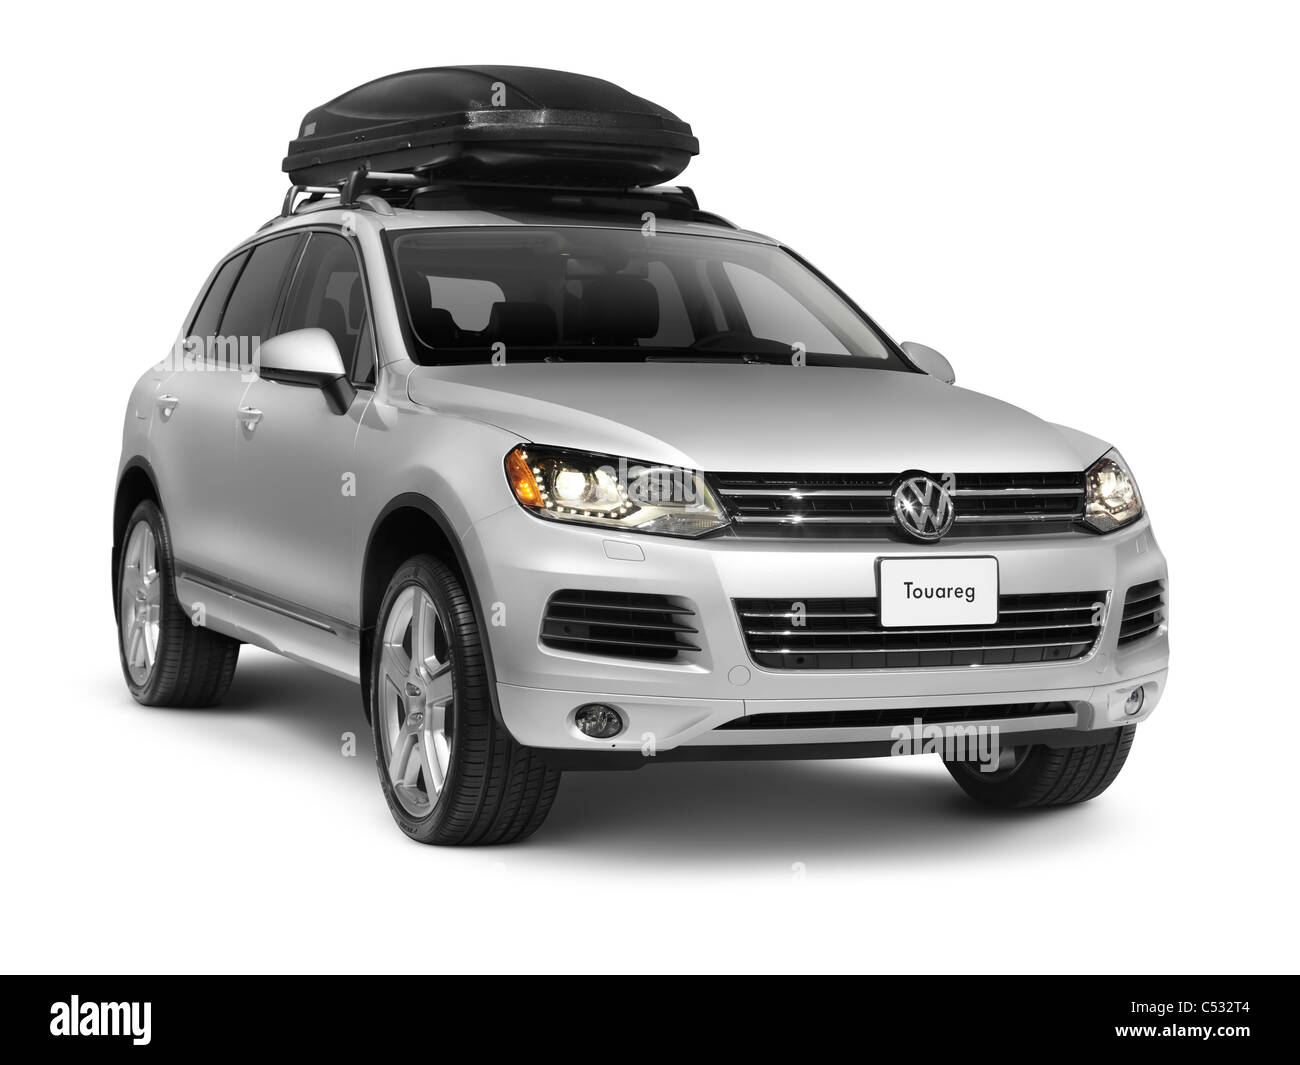 License available at MaximImages.com - Silver Volkswagen Touareg mid-size crossover SUV with a roof box. Isolated car on white background with cl Stock Photo